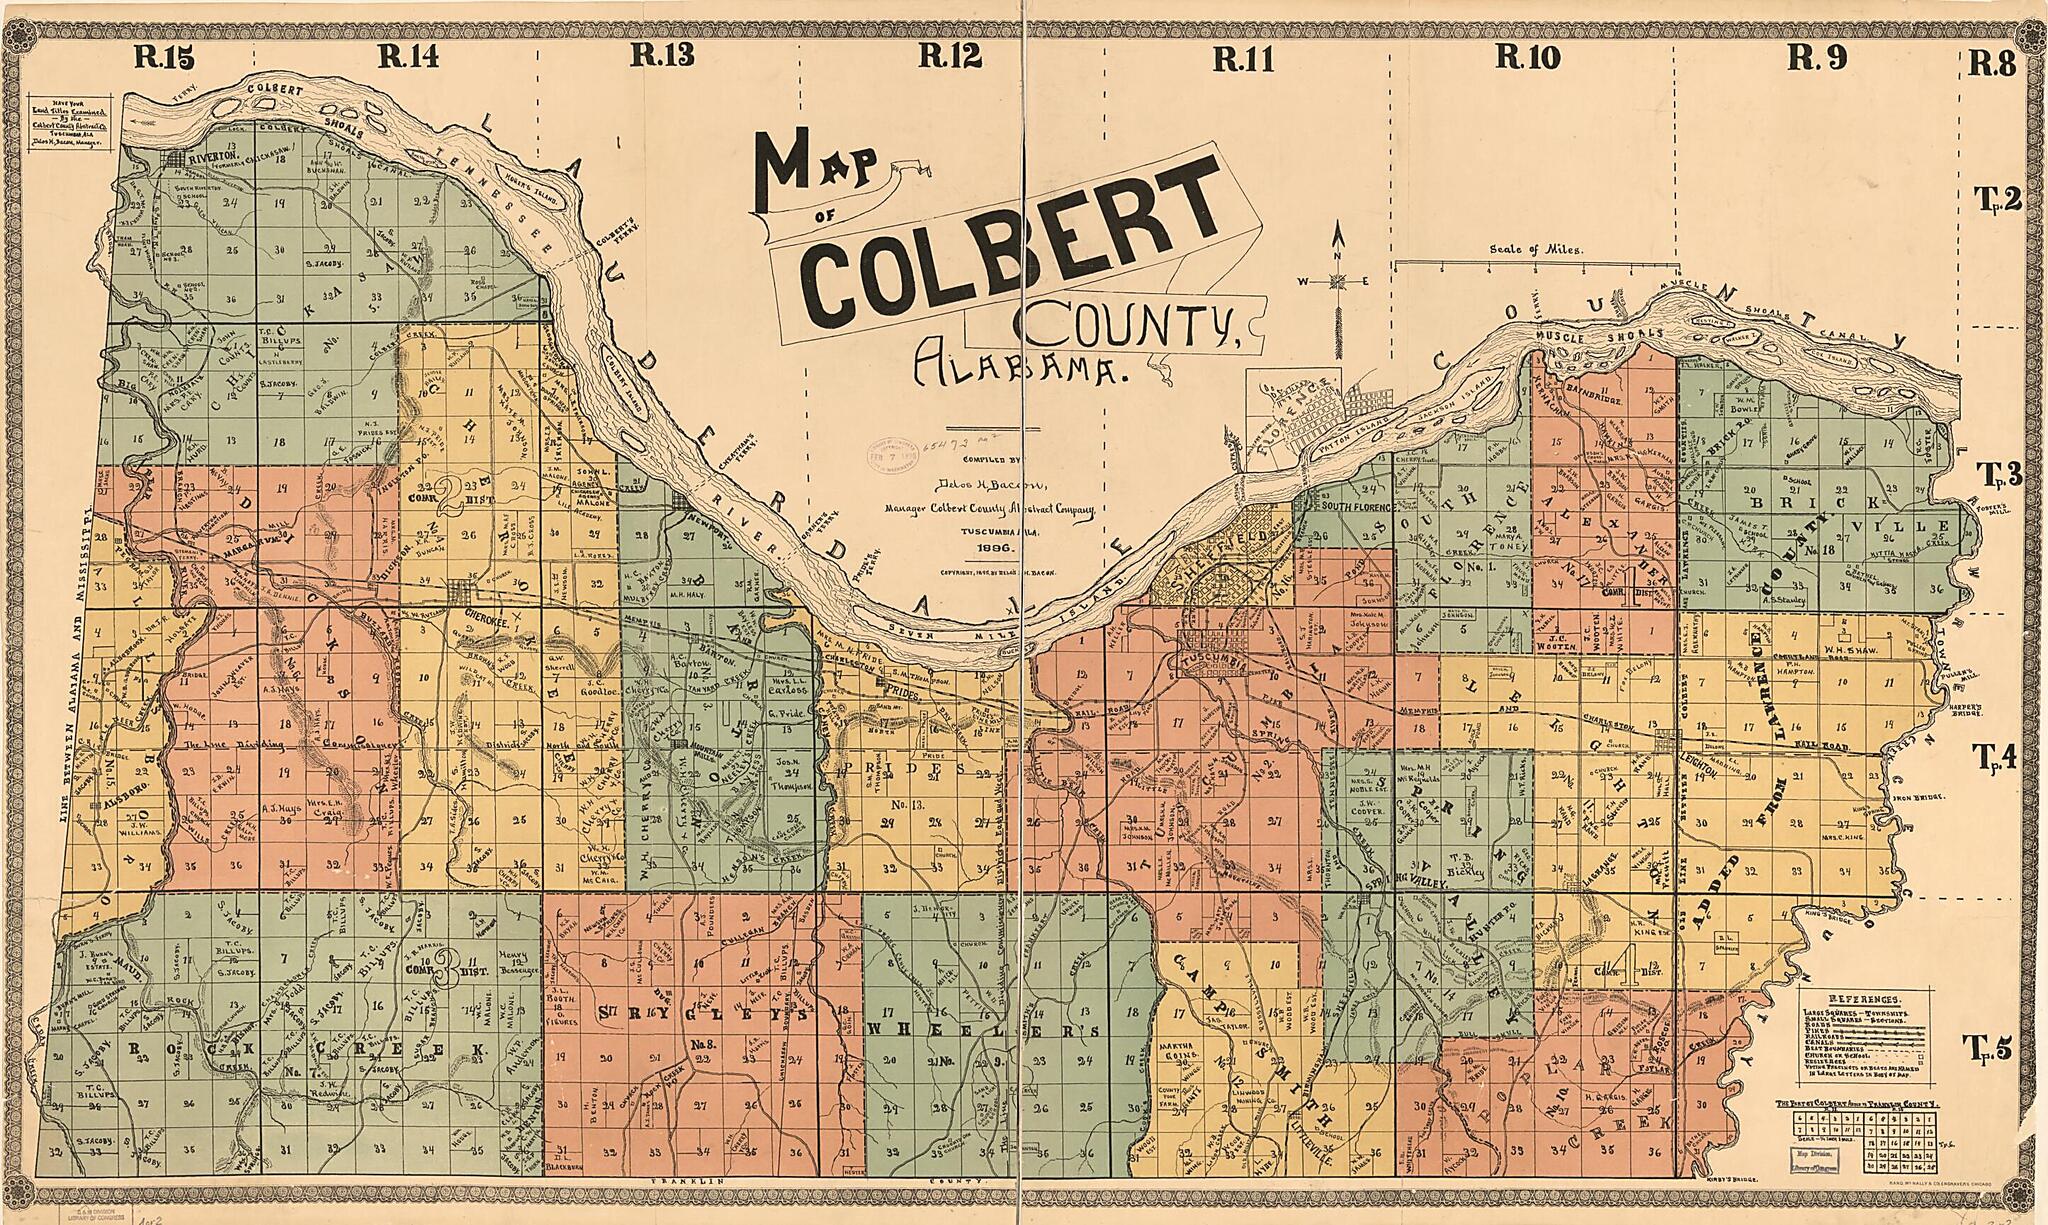 This old map of Map of Colbert County, Alabama from 1896 was created by Delos H. Bacon in 1896